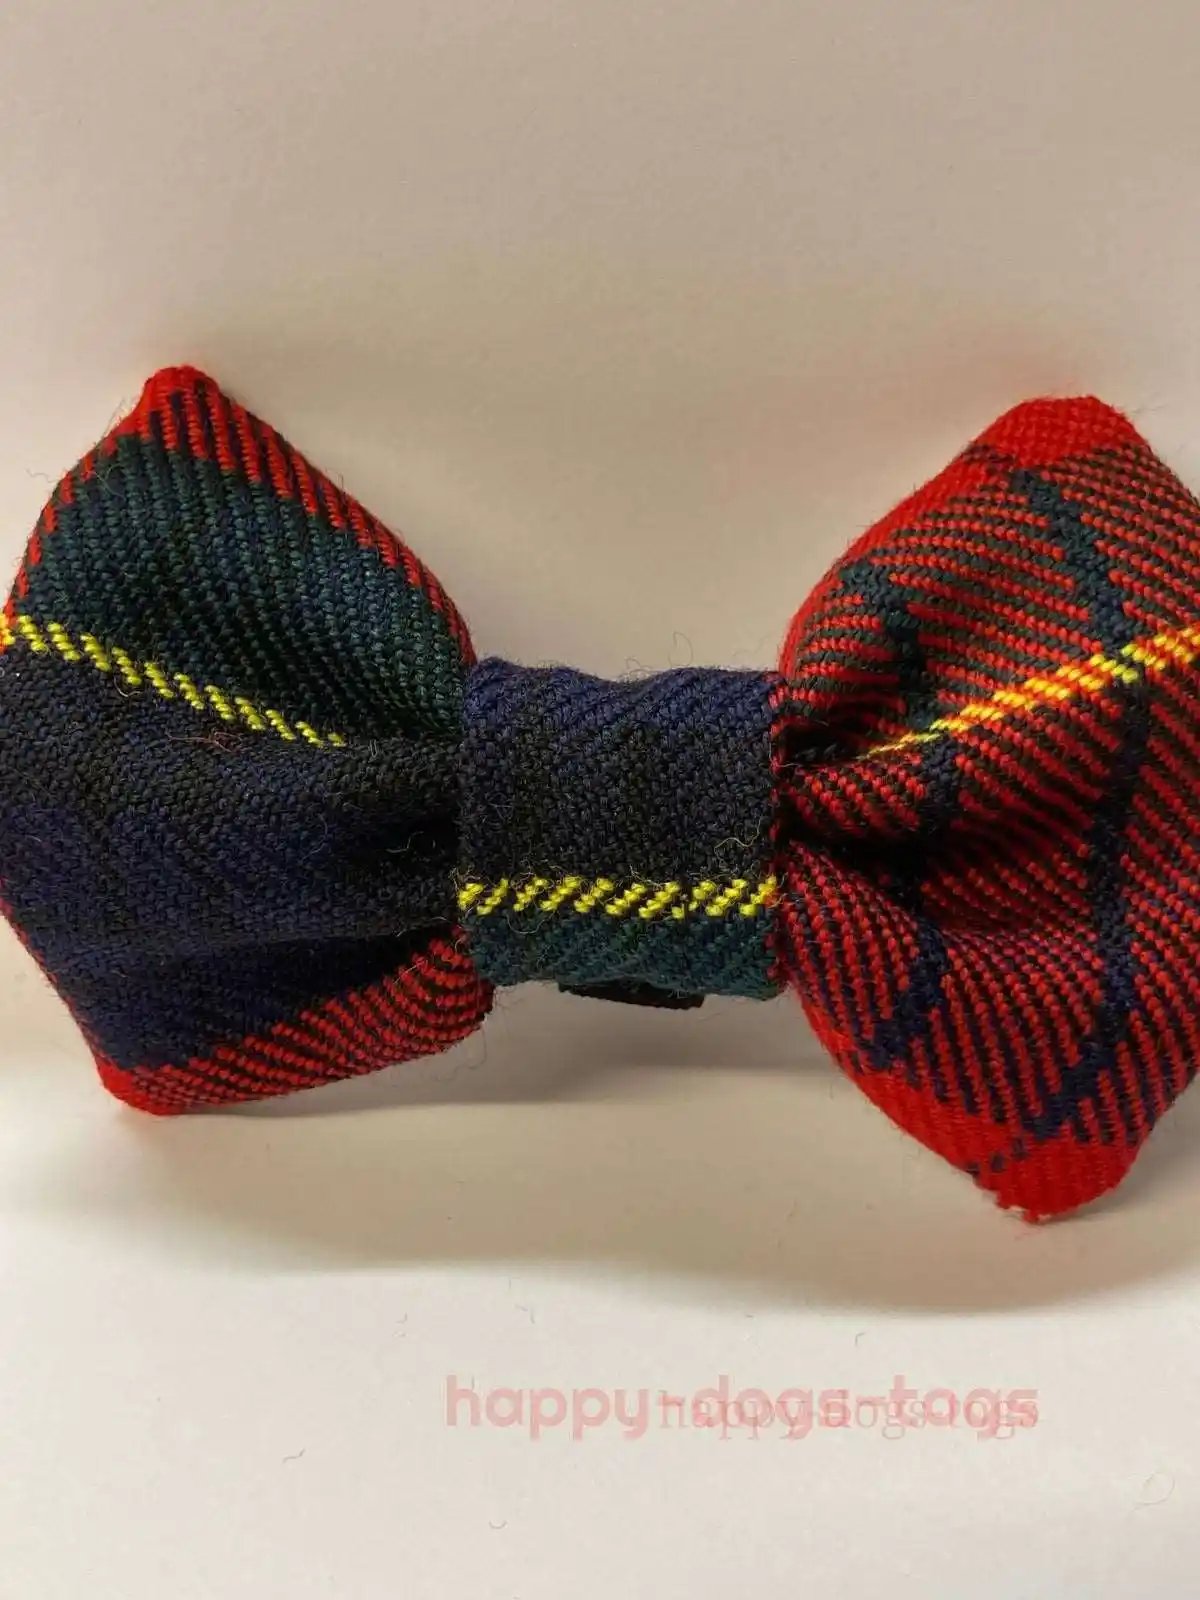 Medium Tartan Dog bow tie in Red, Black and Yellow